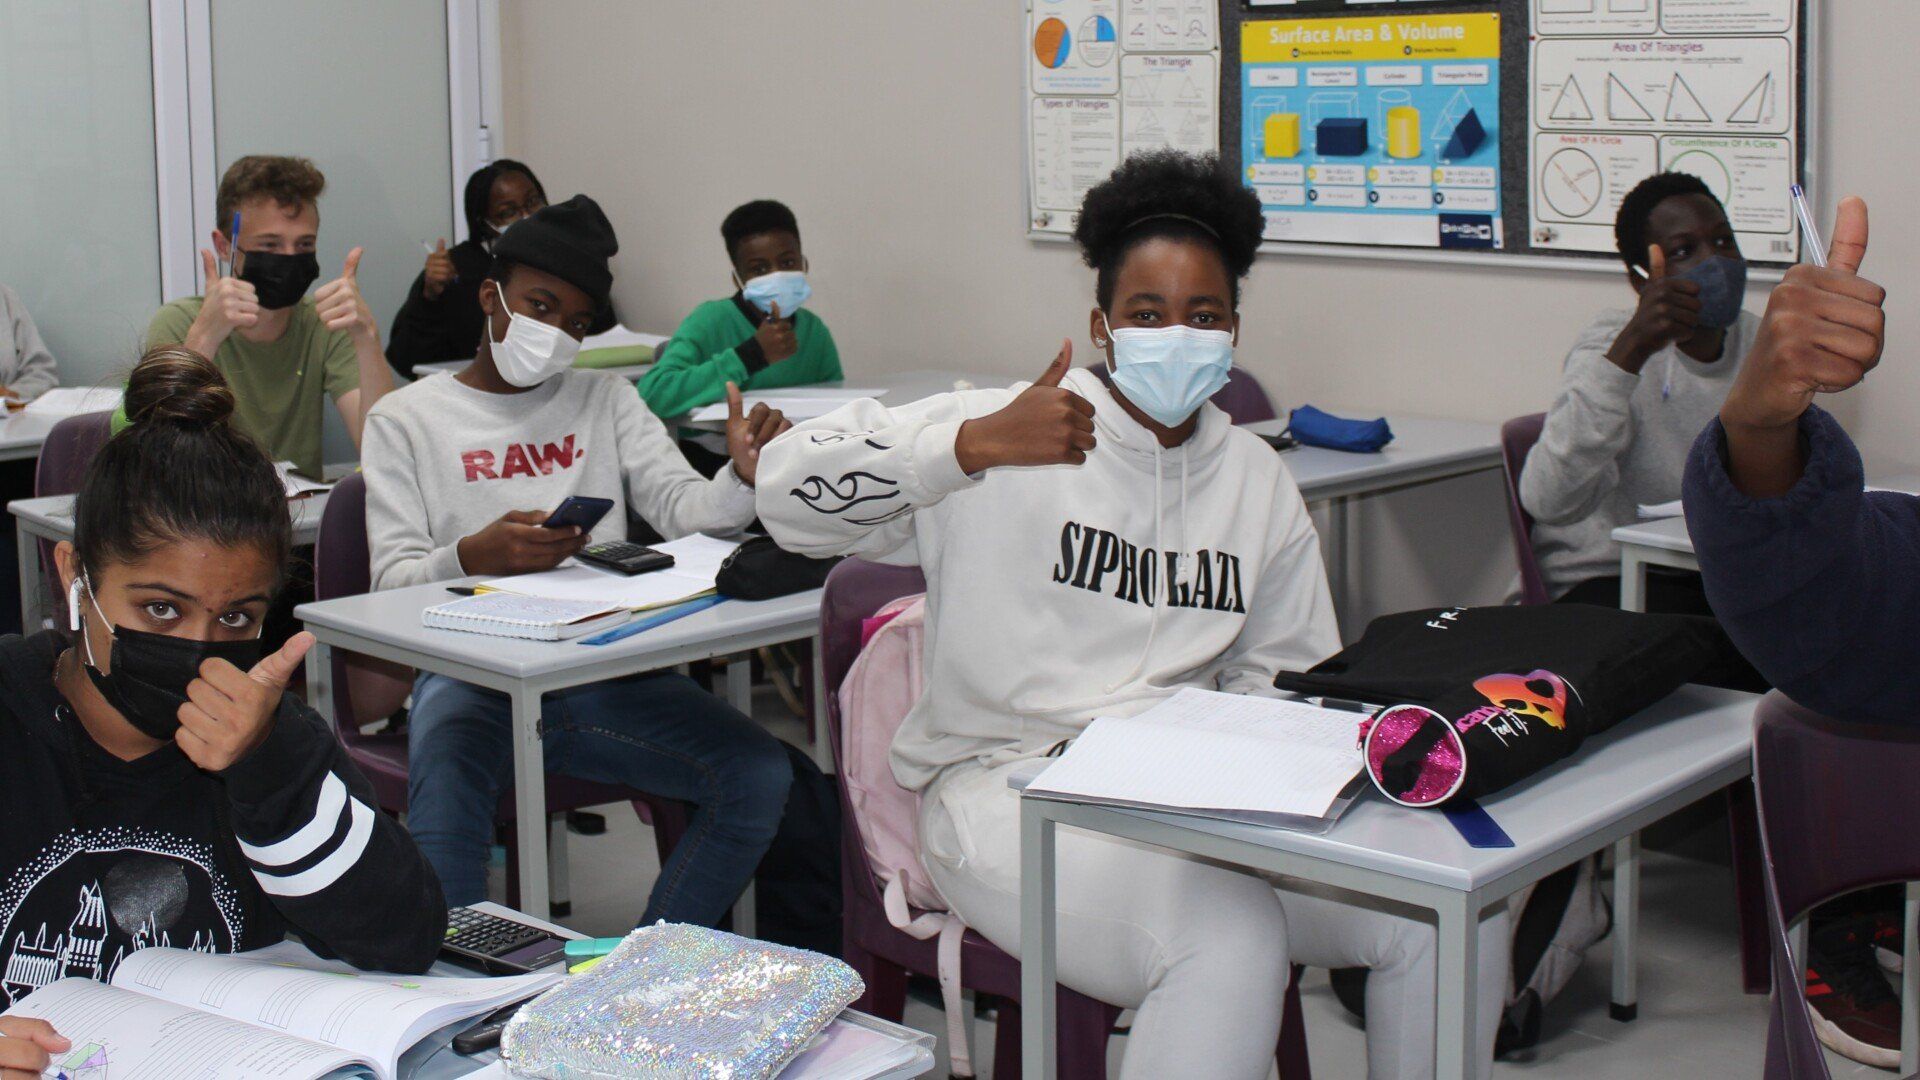 a group of students wearing face masks are sitting at desks in a classroom .